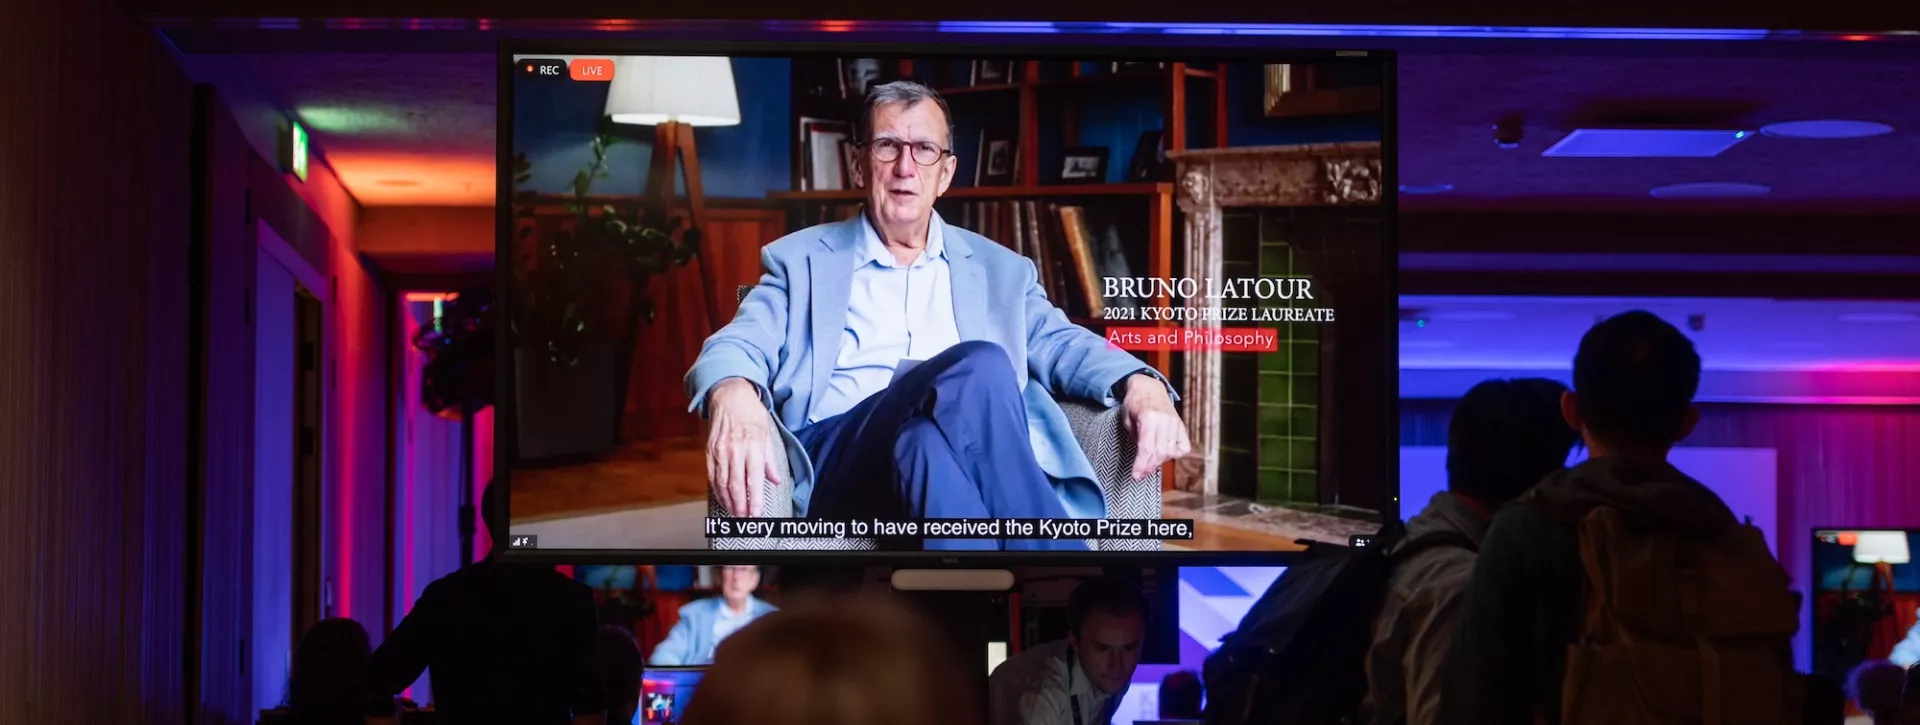 Bruno Latour by video link